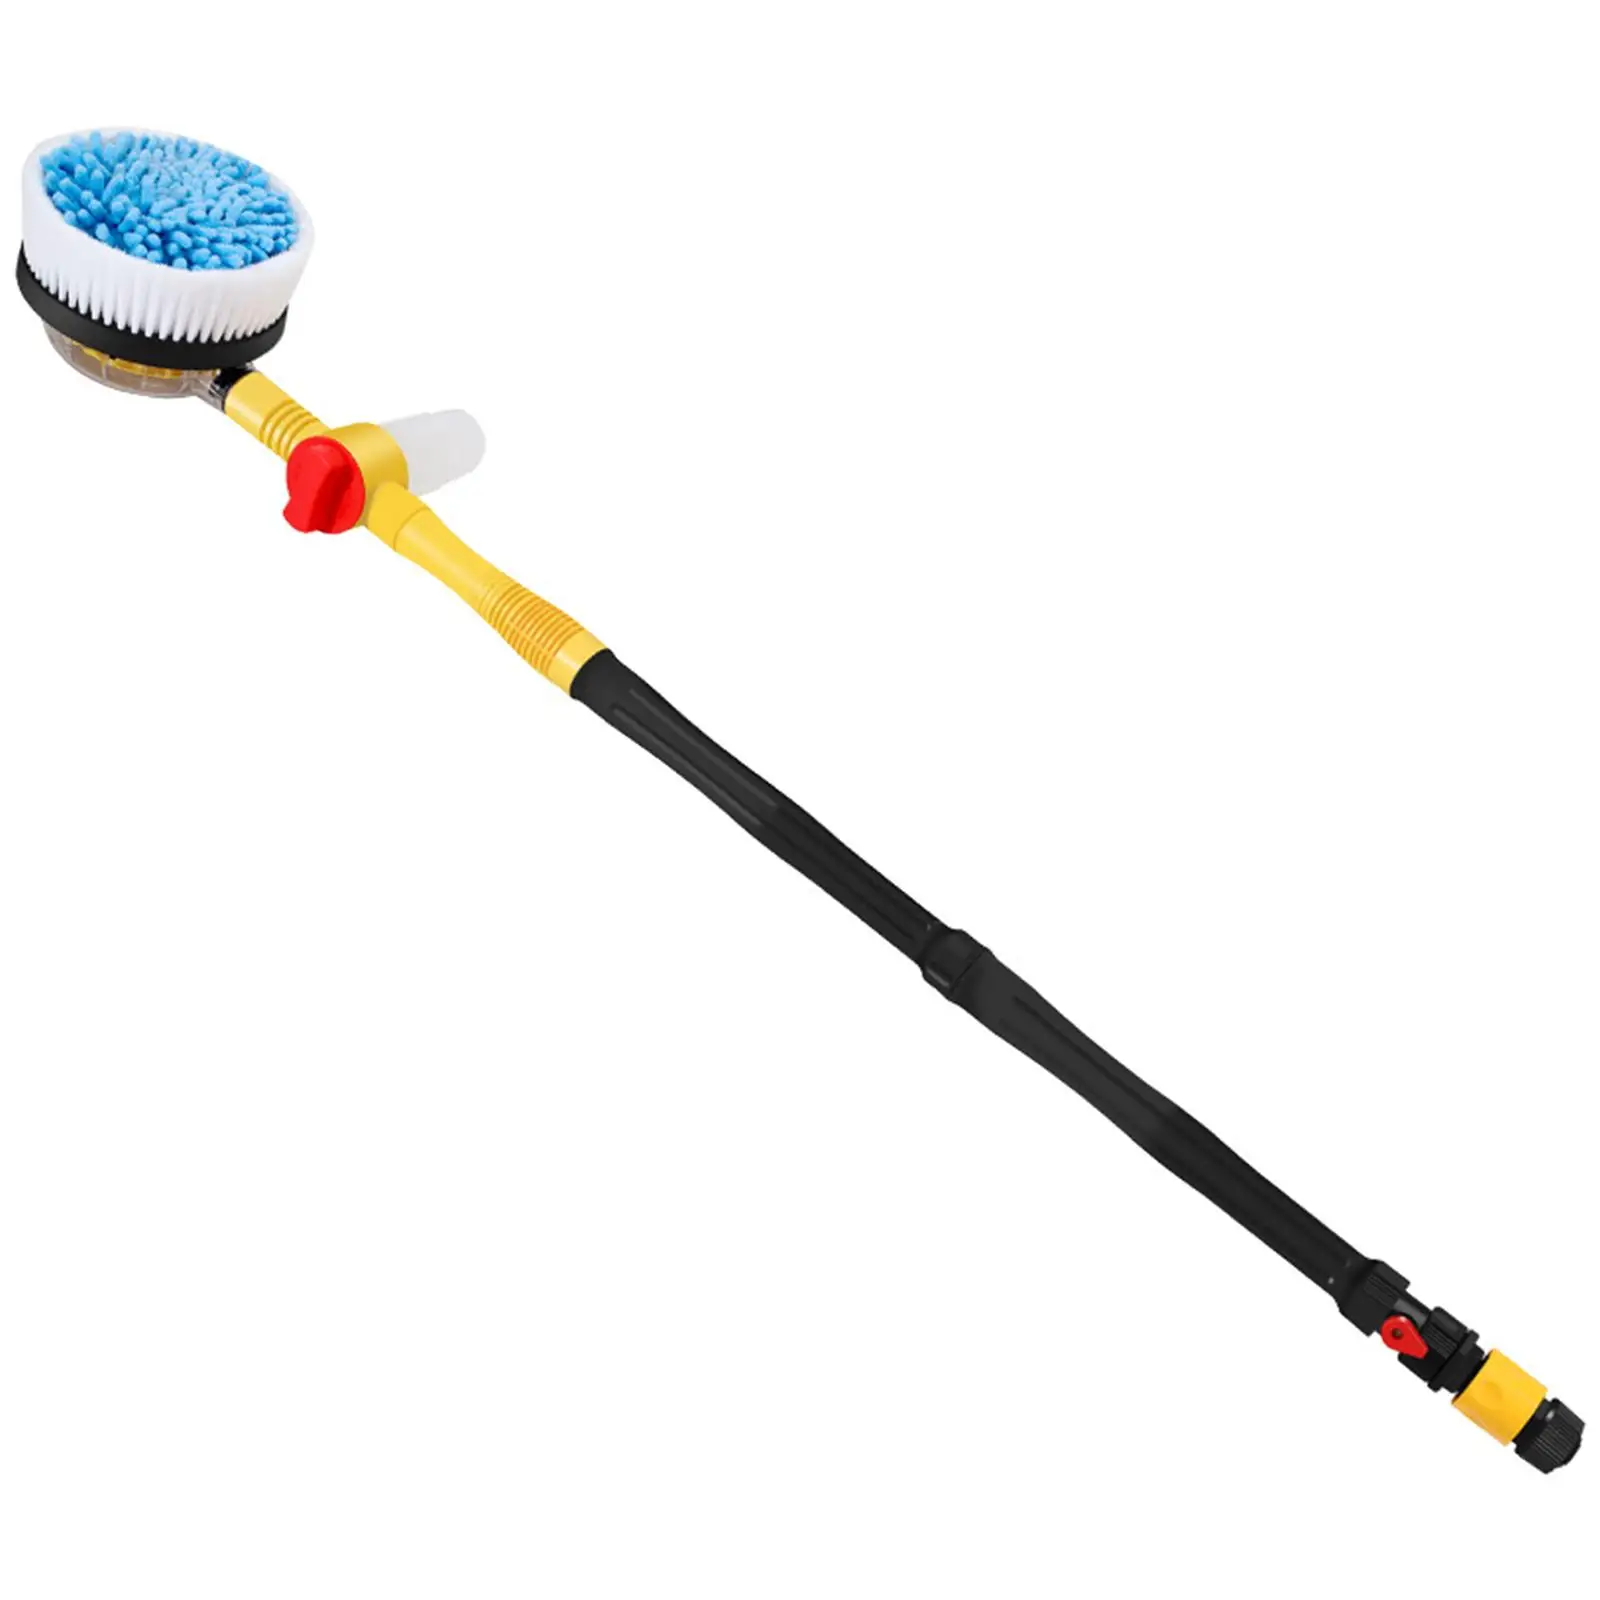 Car Rotary Wash Brush Kit Adjustable High Pressure Washer Fit for Automotive Cleaning